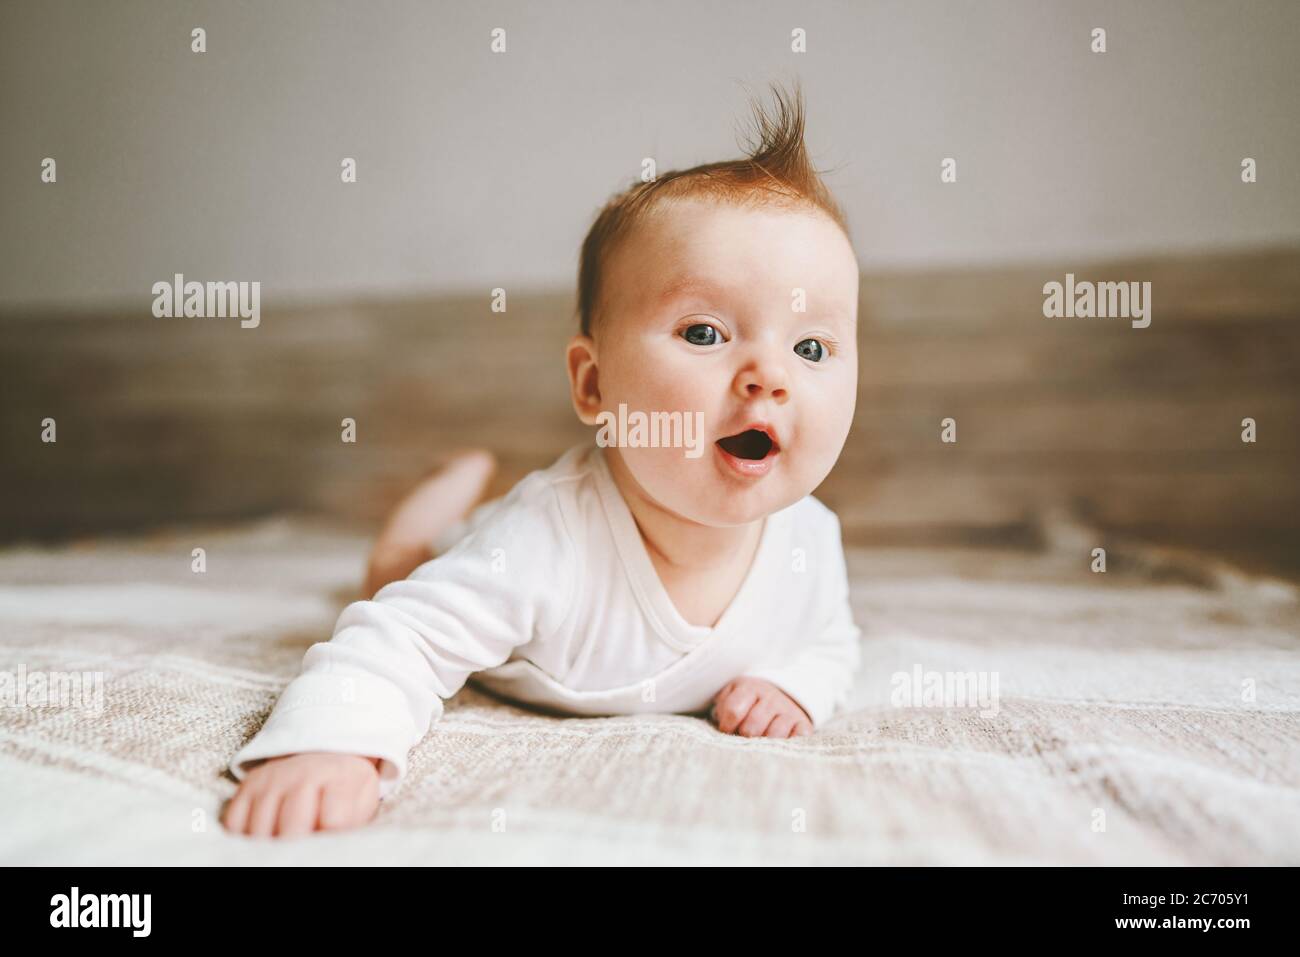 Cute baby infant crawling at home curious child portrait family lifestyle 3 month old girl kid Stock Photo